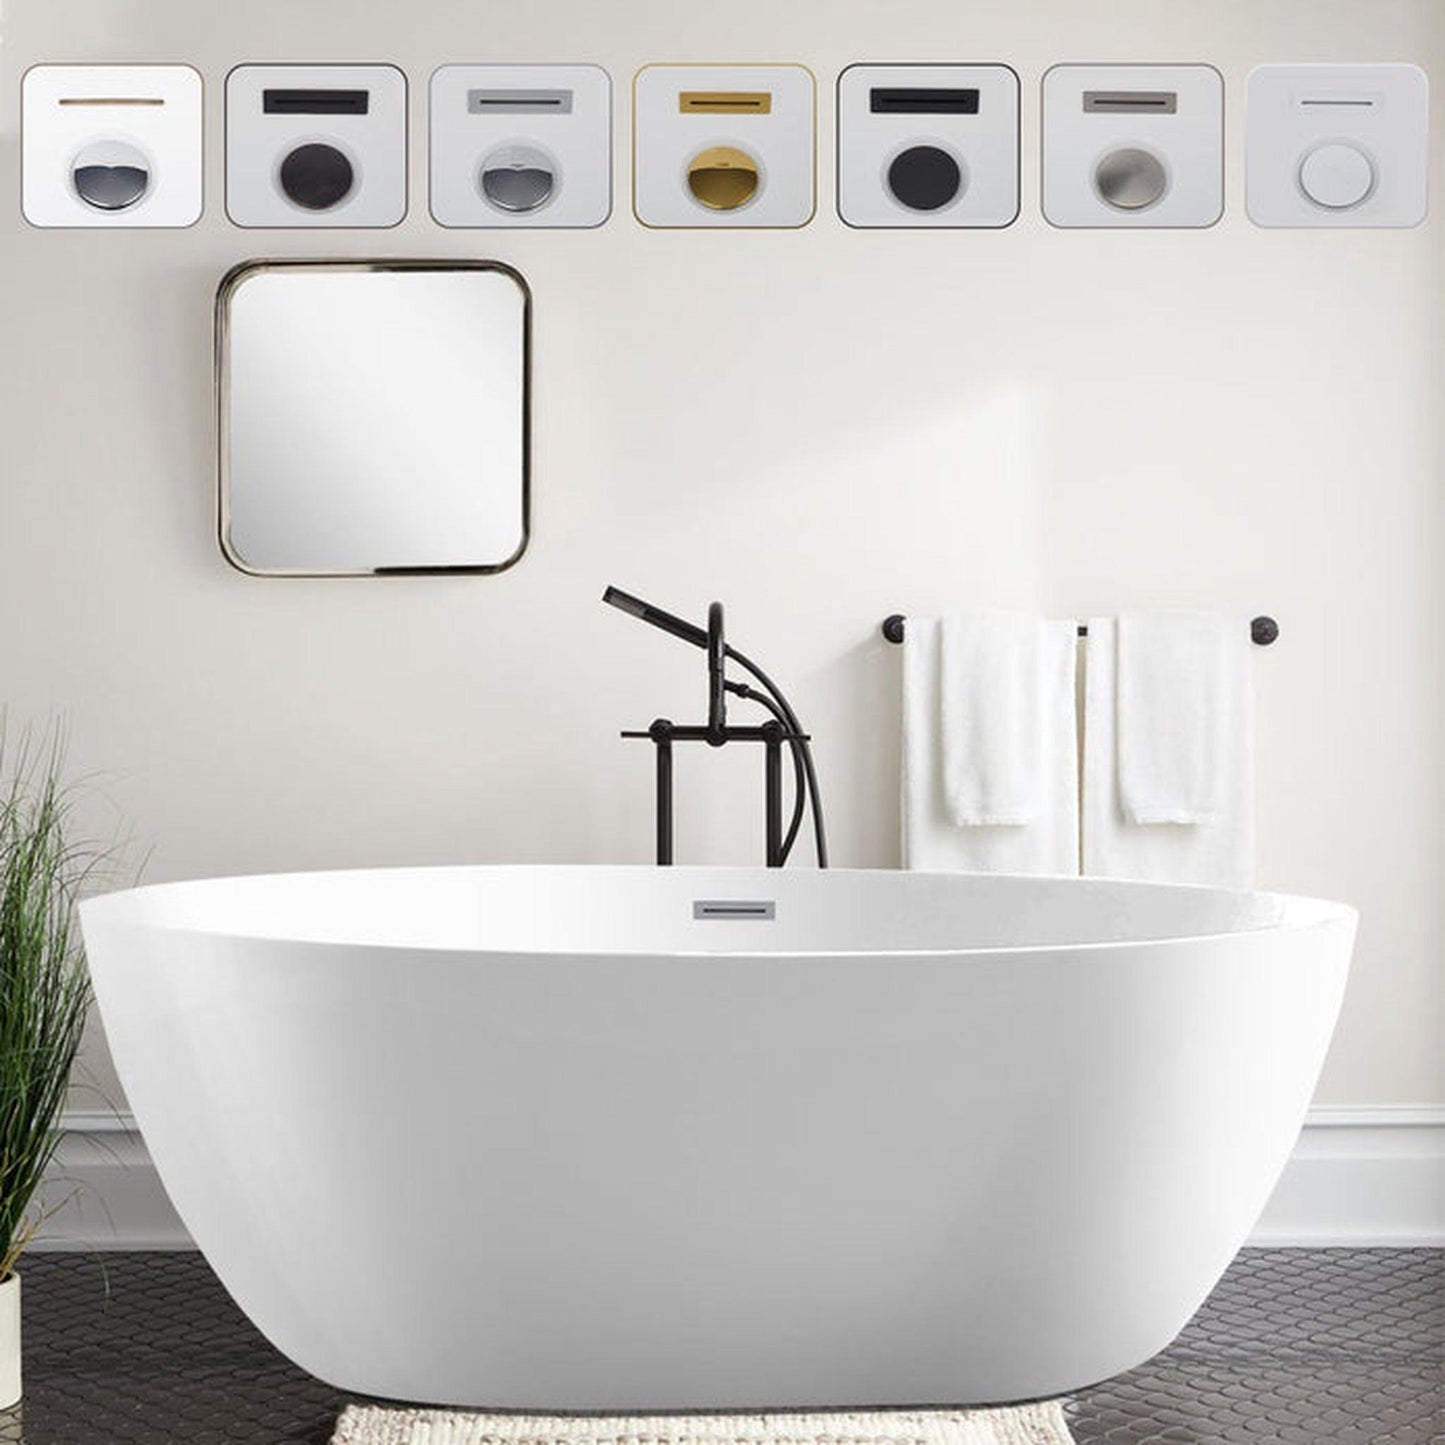 Vanity Art 55" x 32" White Contemporary Design Soaking Bathtub With Polished Chrome Slotted Overflow and Pop-up Drain